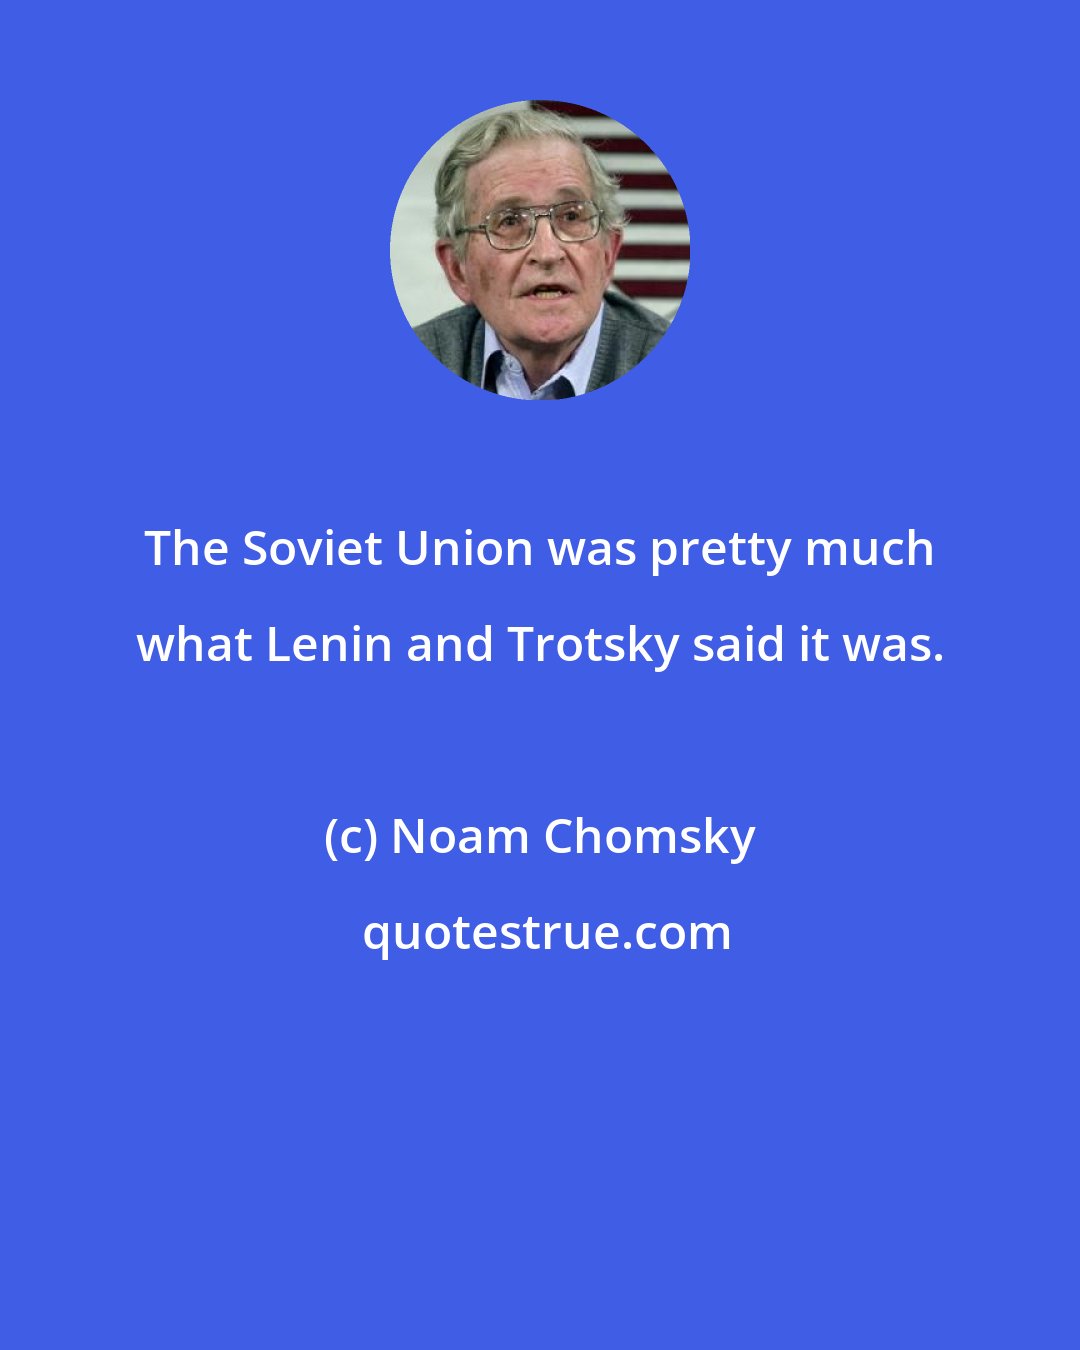 Noam Chomsky: The Soviet Union was pretty much what Lenin and Trotsky said it was.